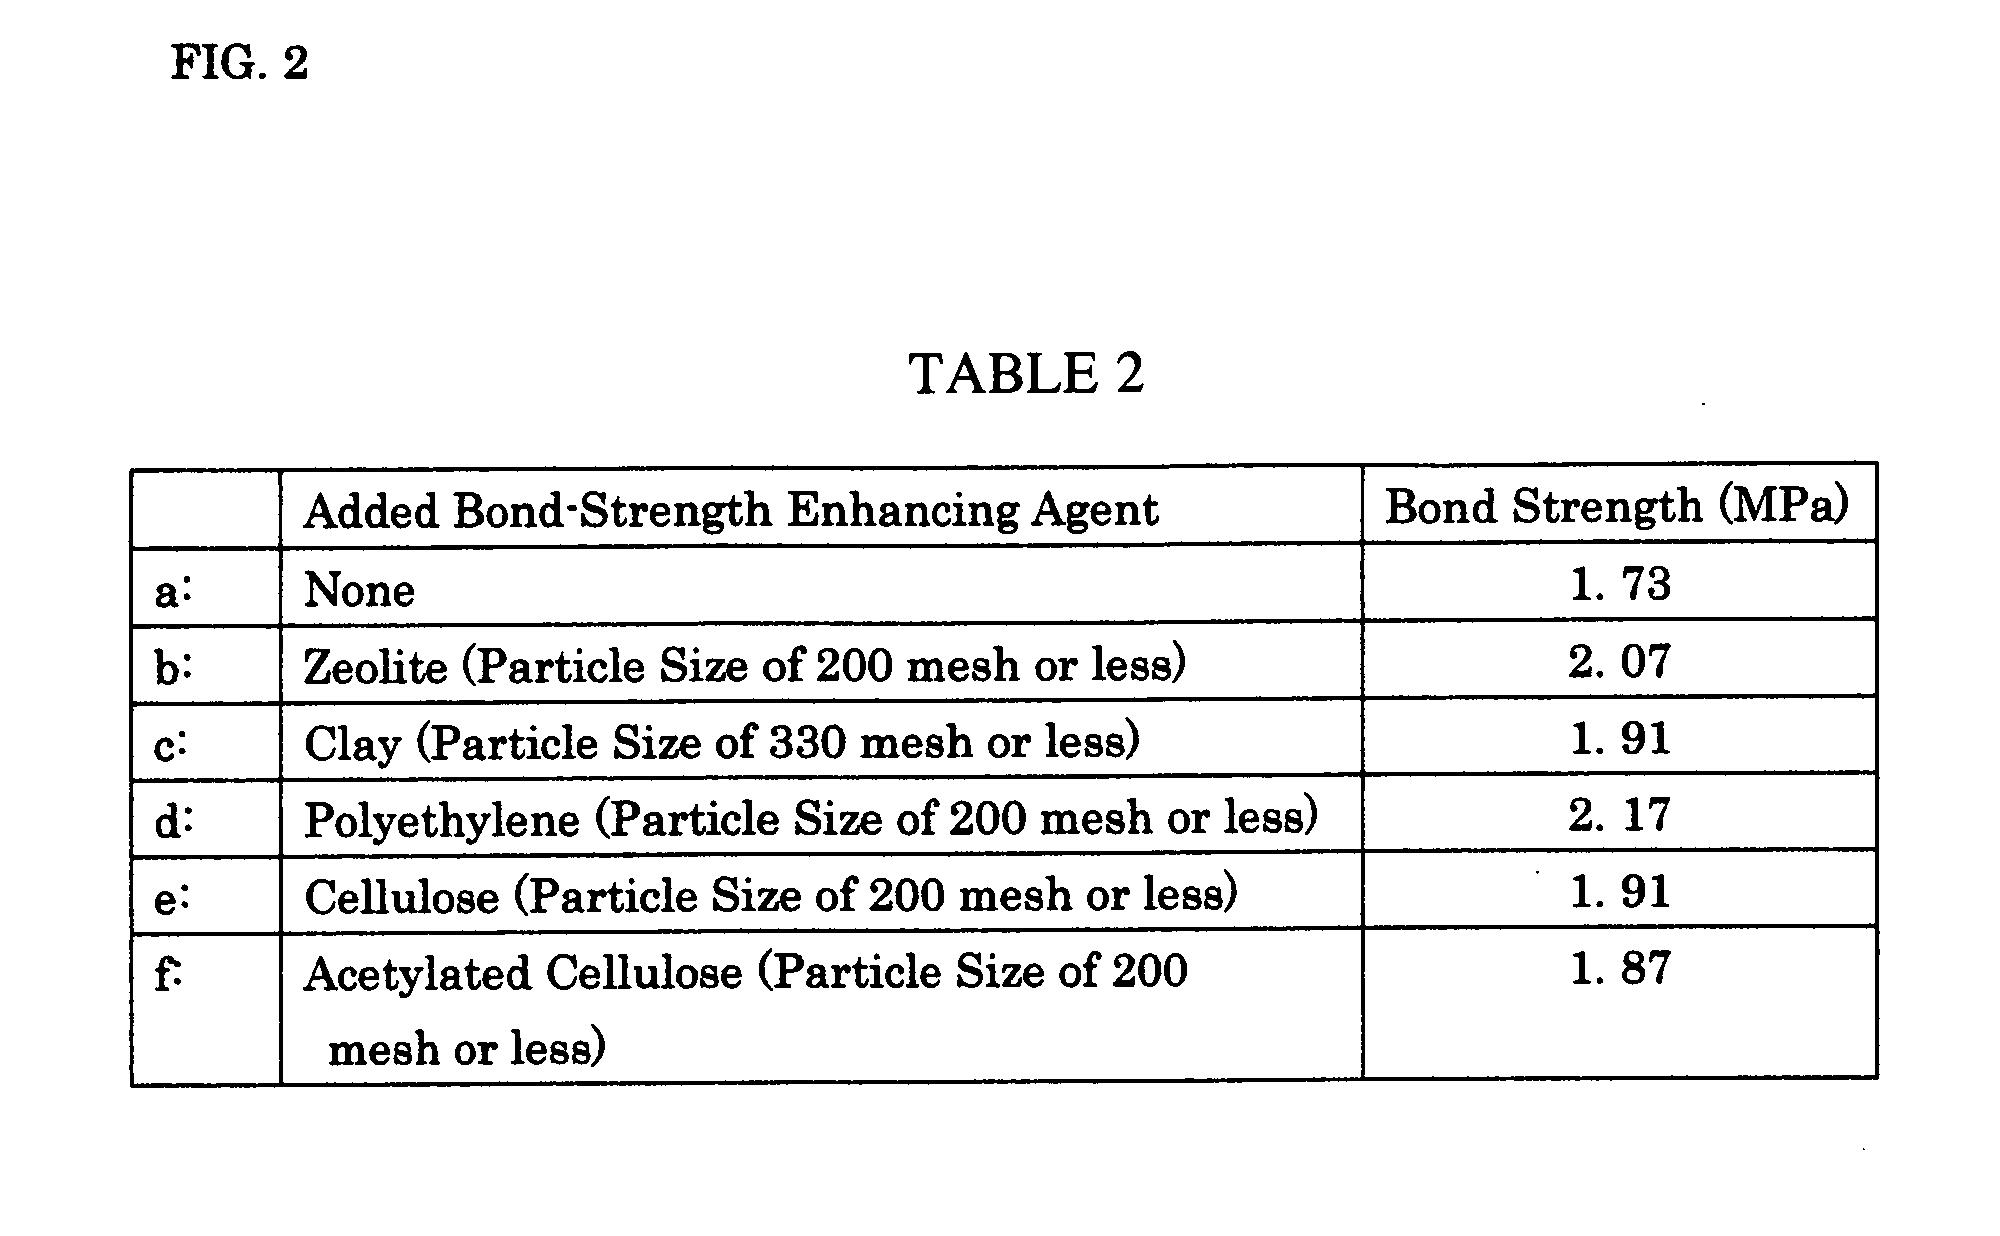 Adhesive compositions containing bond-strength enhancing agent and methods for producing woody board using adhesive compositions